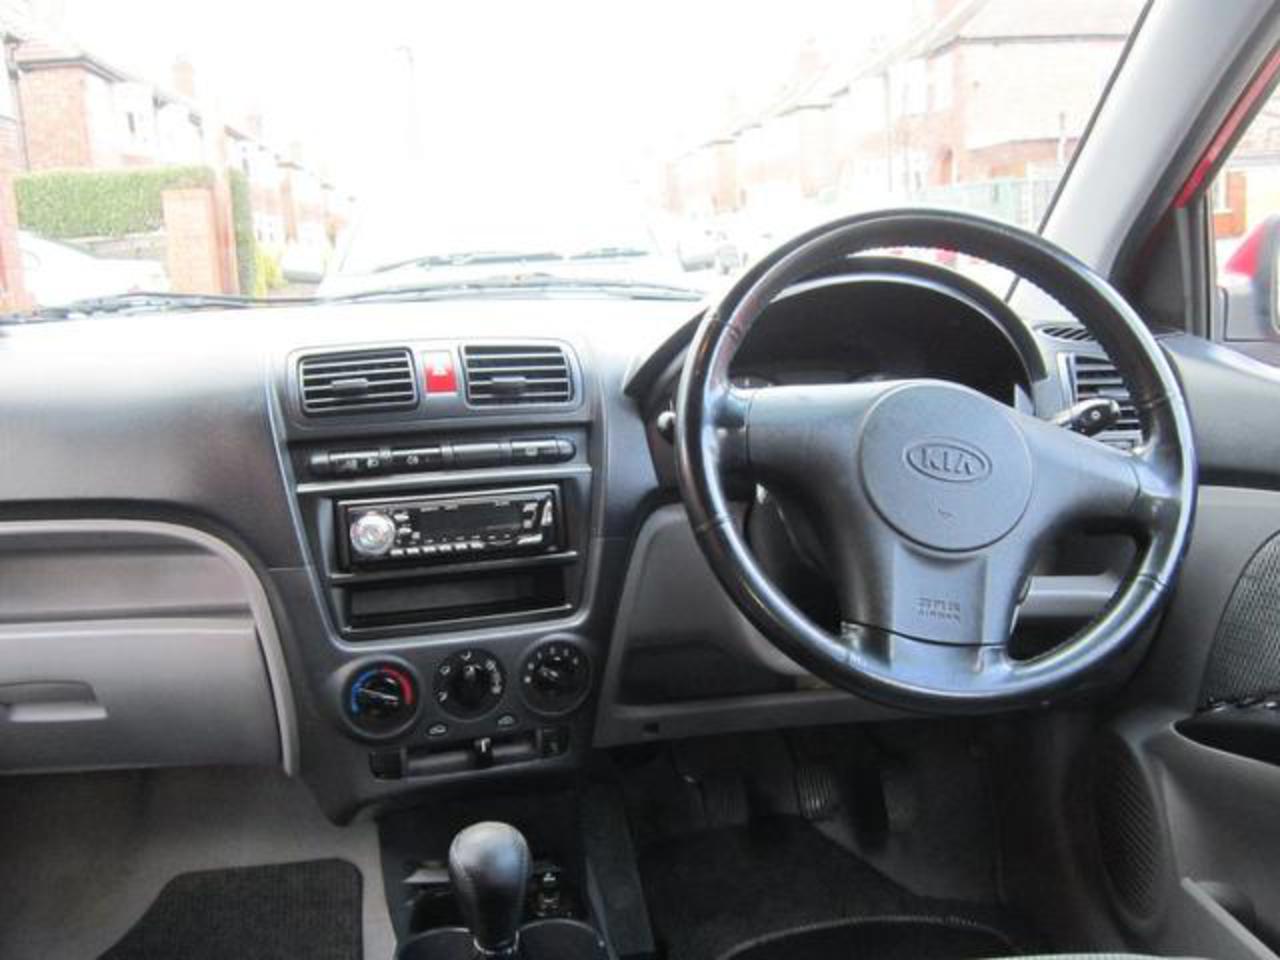 Used Kia Picanto Hatchback 1.1 Lx 5dr in Stockport, Cheshire ...